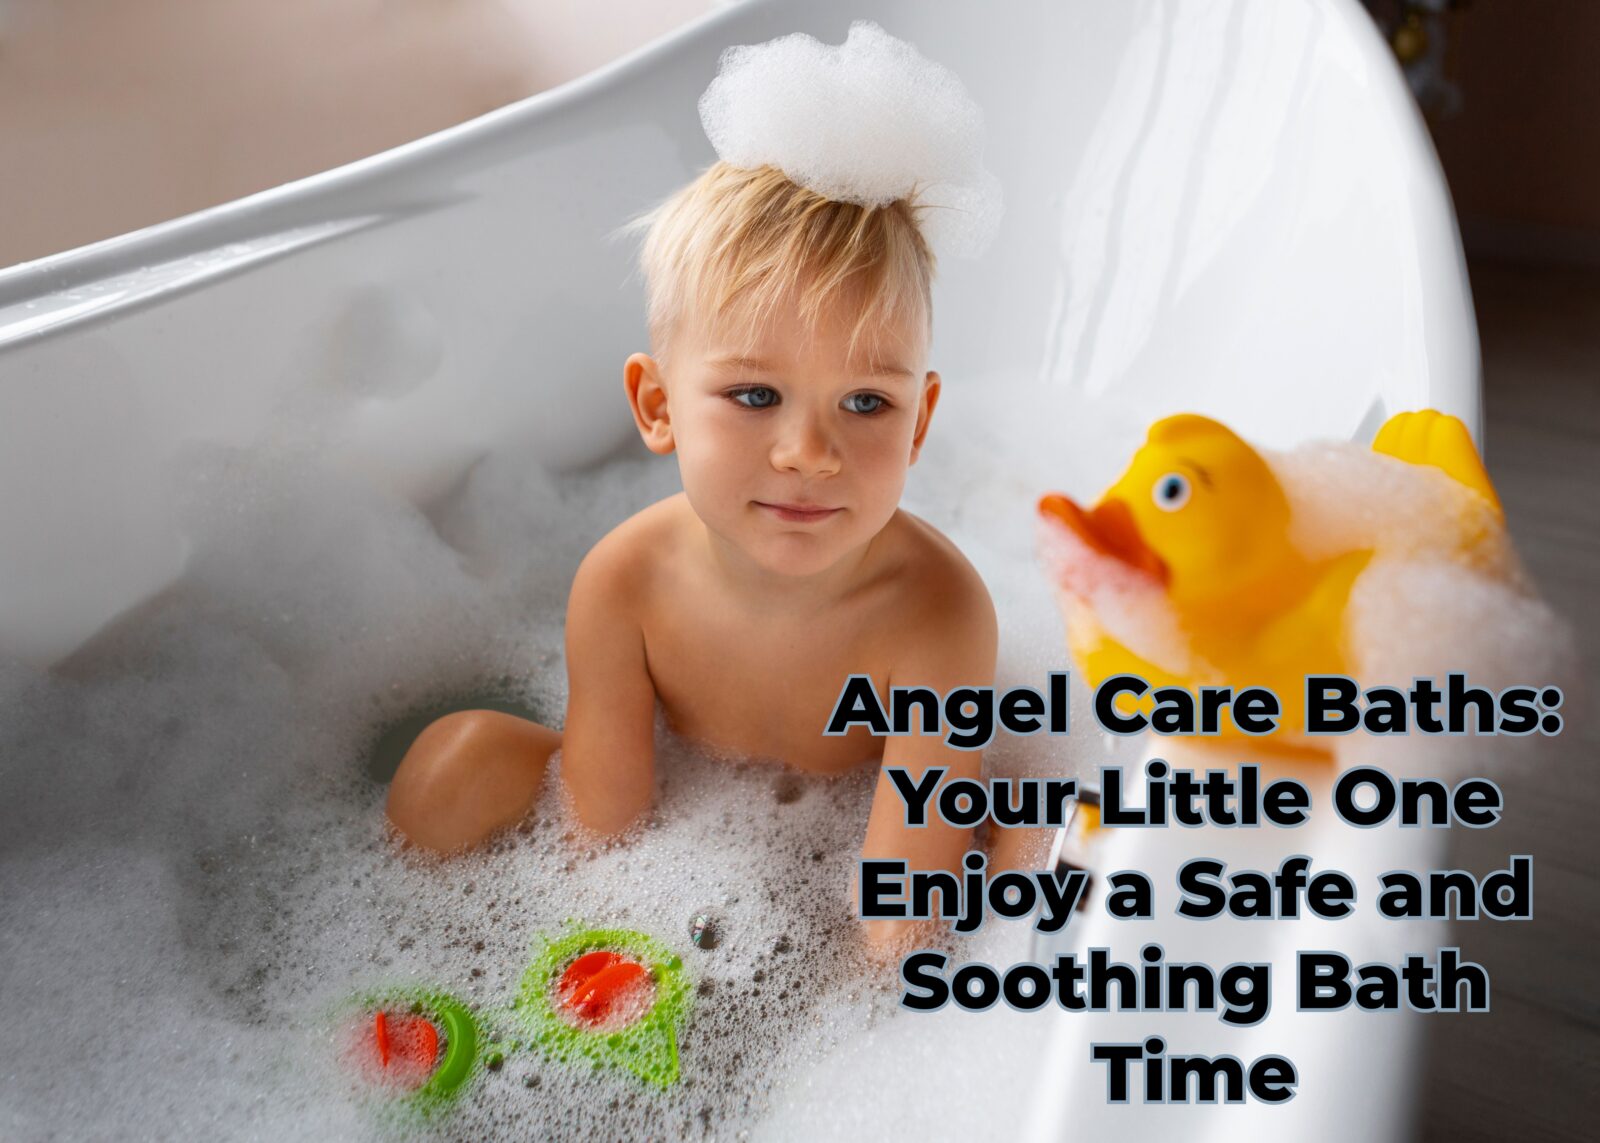  Angel Care Baths: Your Little One Enjoy a Safe and Soothing Bath Time